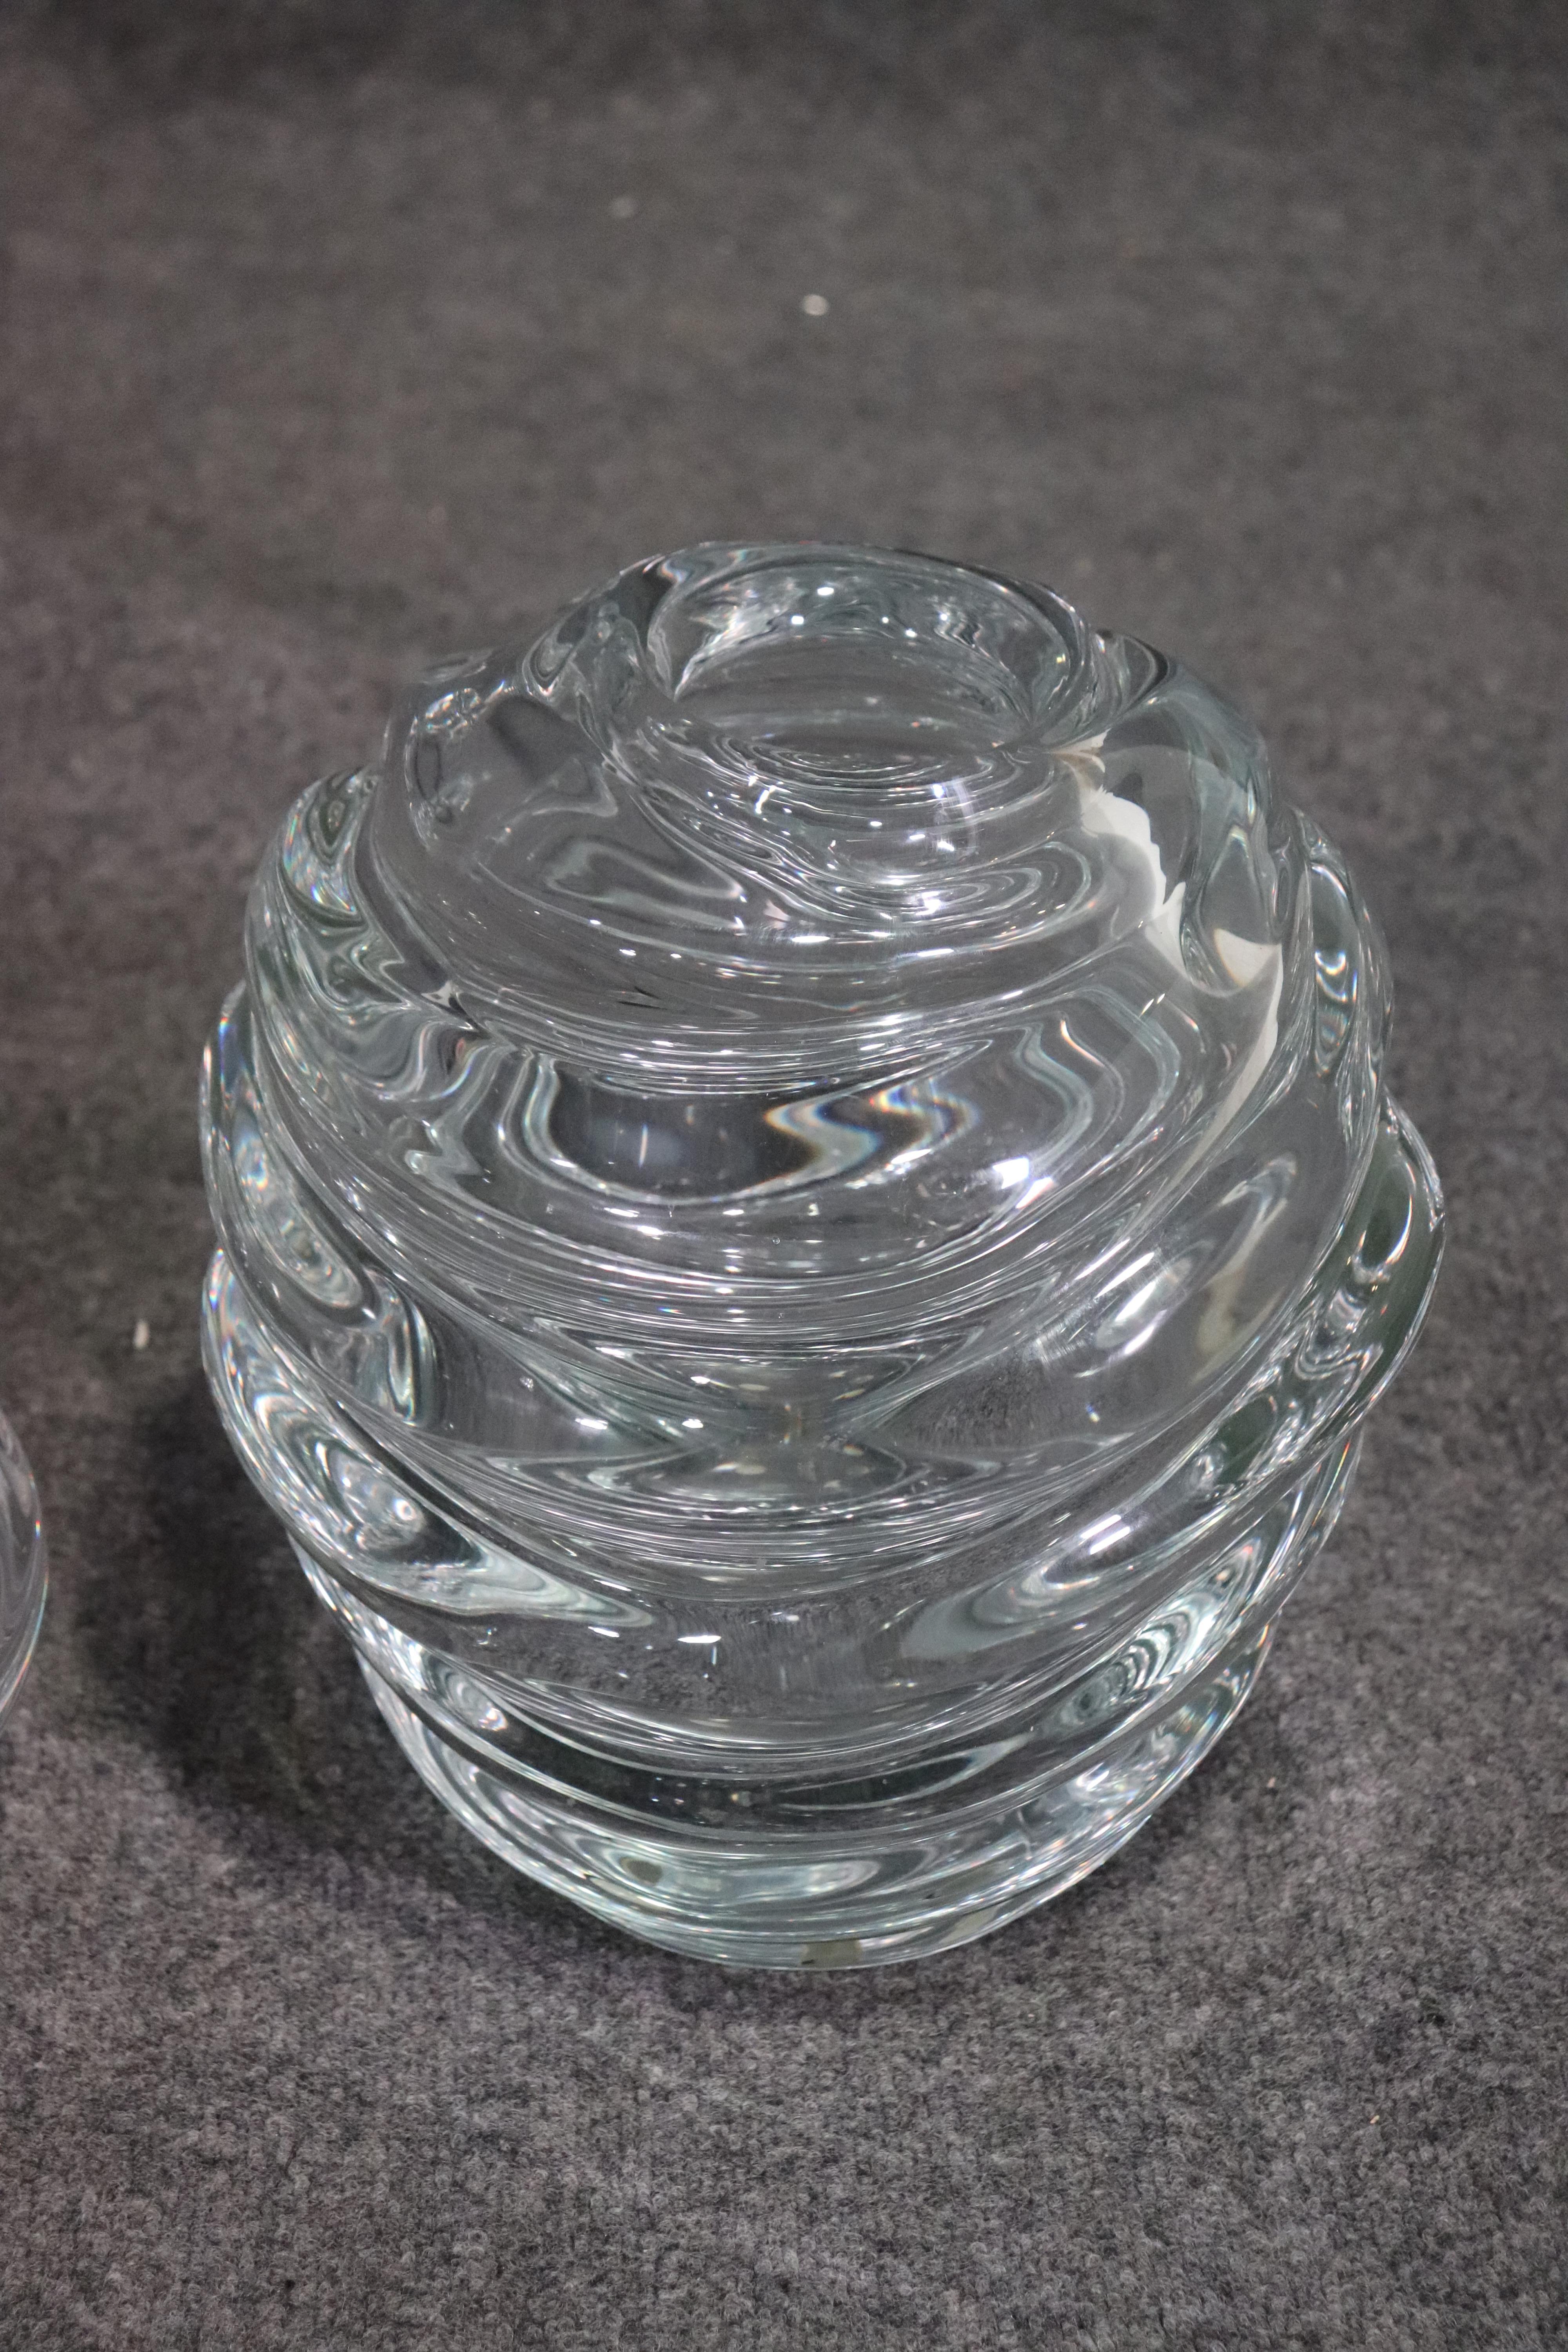 This is being sold as separate pieces or as a set as shown here.

This is a fantastic and extremely heavy Carlo Moretti vase and matching bowl or centerpiece. These were handmade by the Venitian master glass blower artiste, Carlo Moretti. The bowl